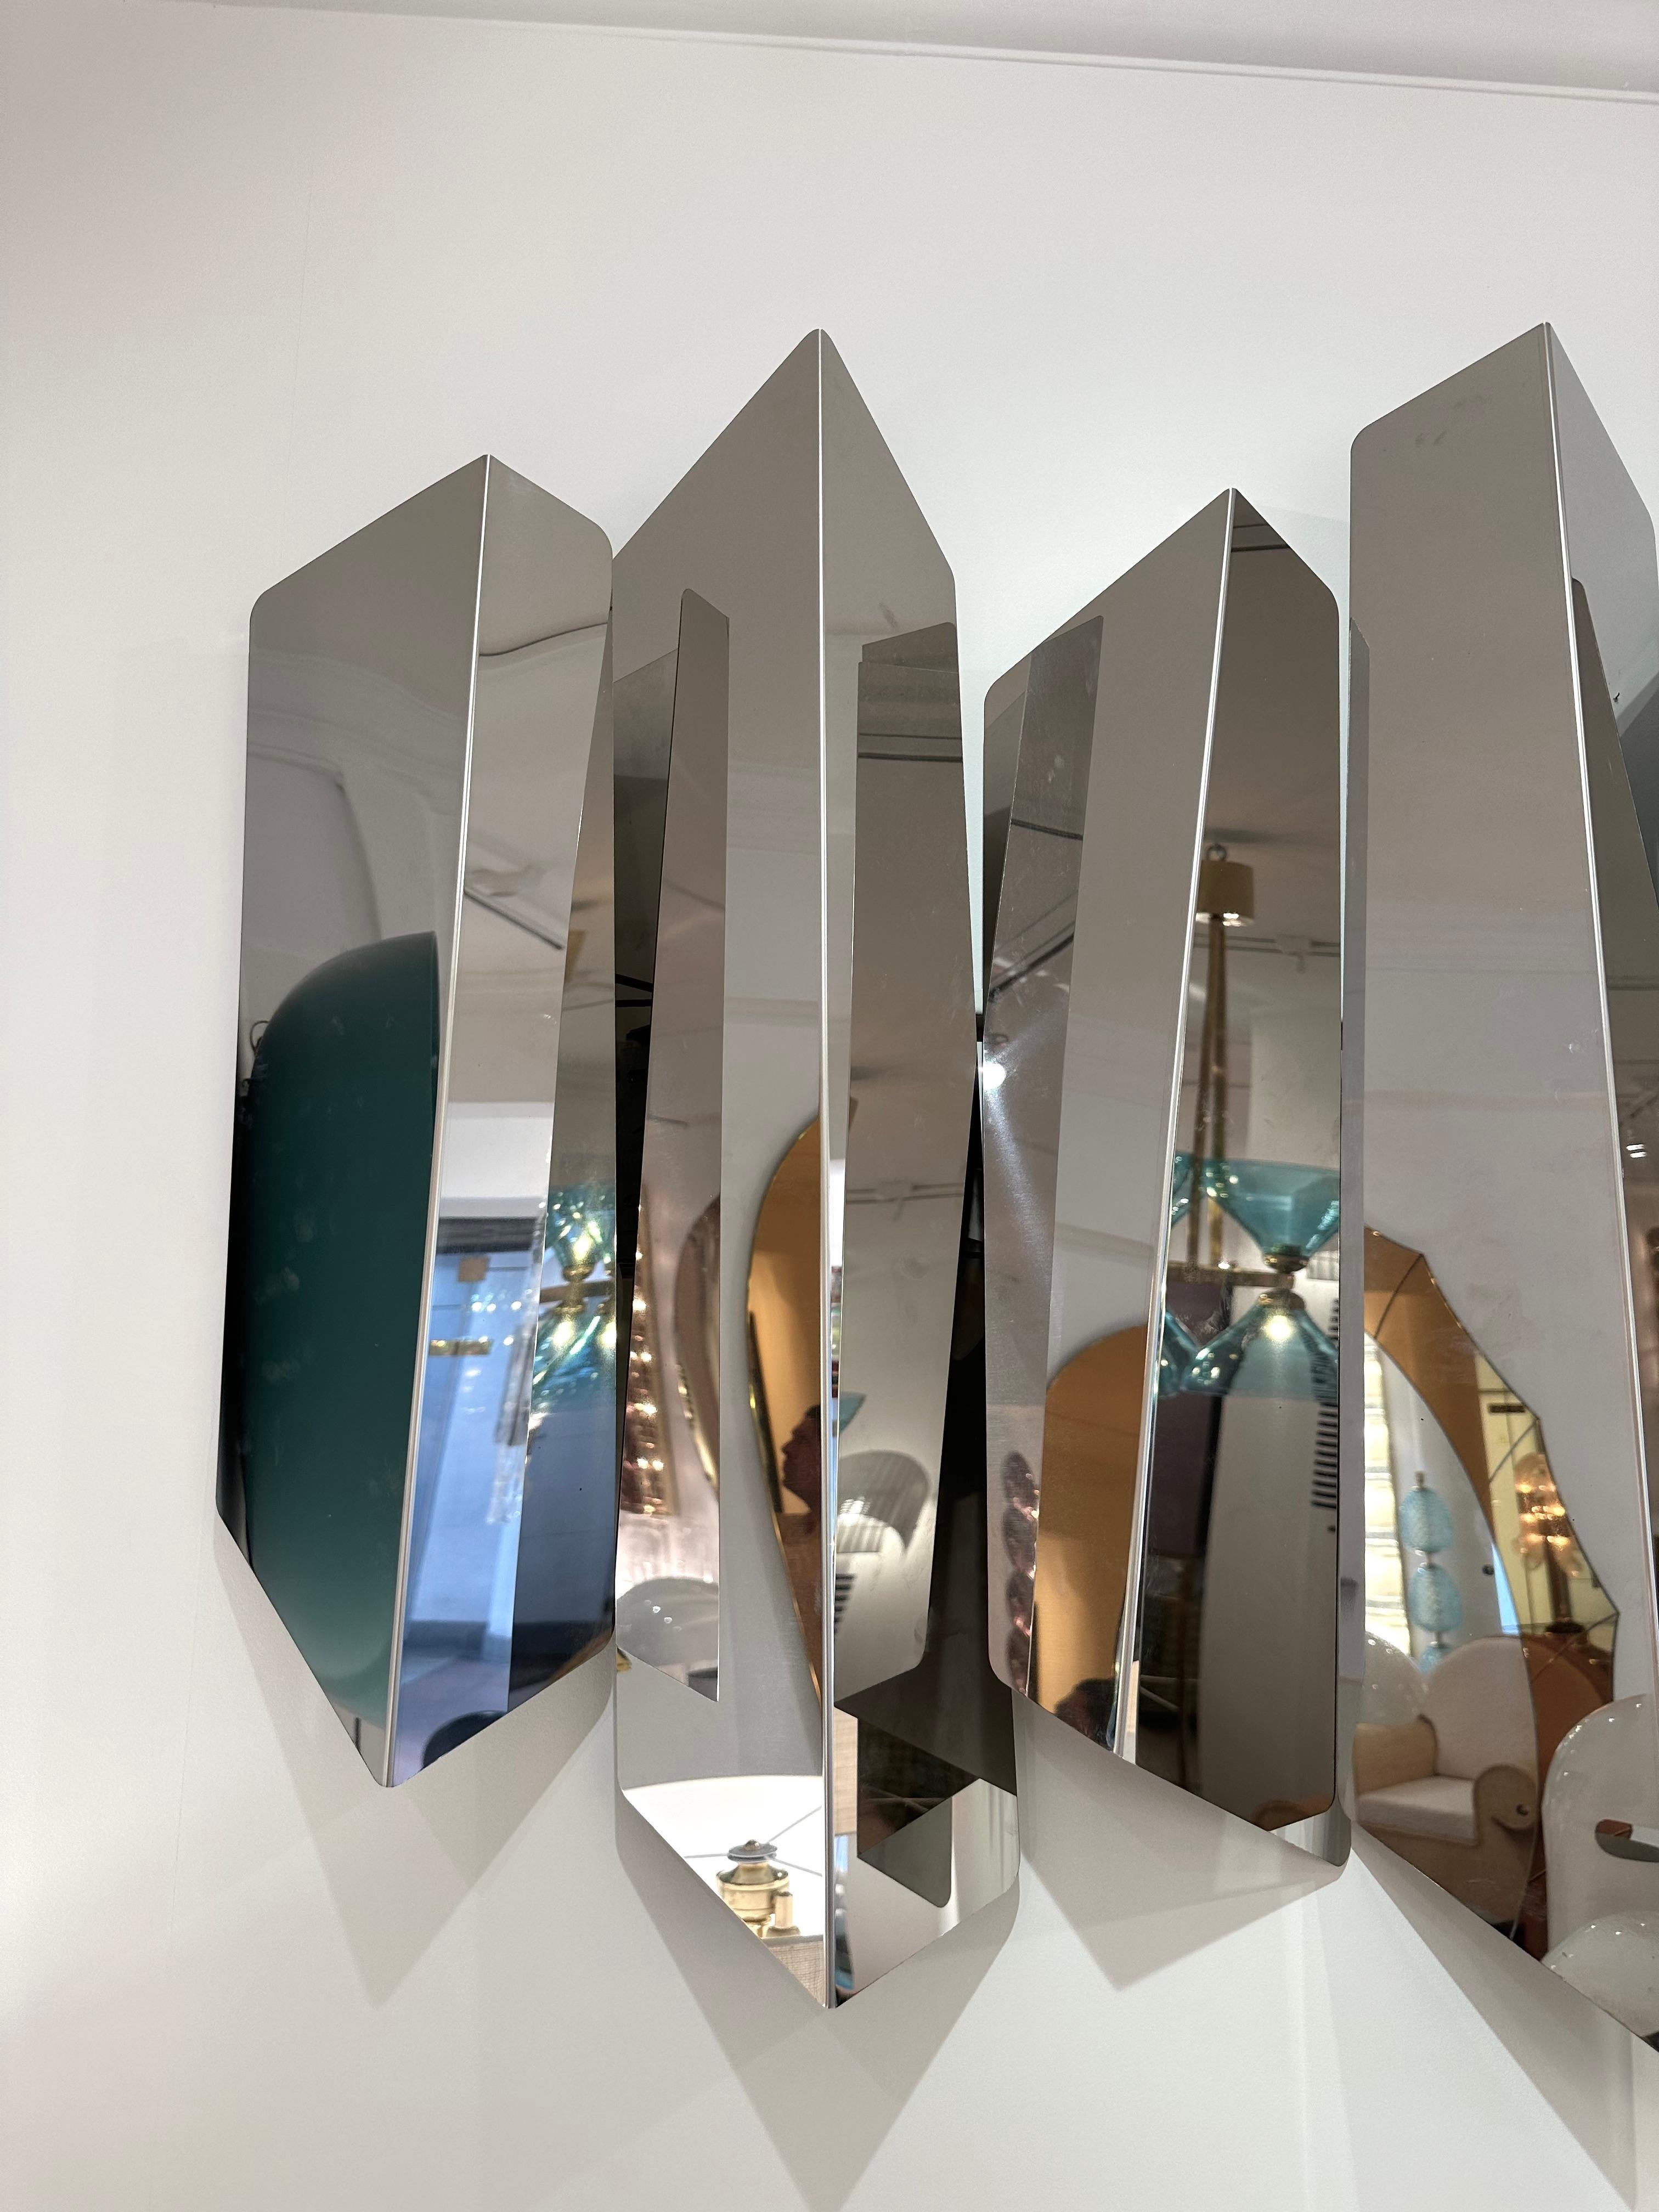 Huge impressive and extremely decorative sculpture sconce or wall light lamp lightning panel by the designer Mario Torregiani. Each blade of polished stainless steel are retro light by ten bulbs. Famous like Aldo Nason, Poliarte, Esperia, Angelo